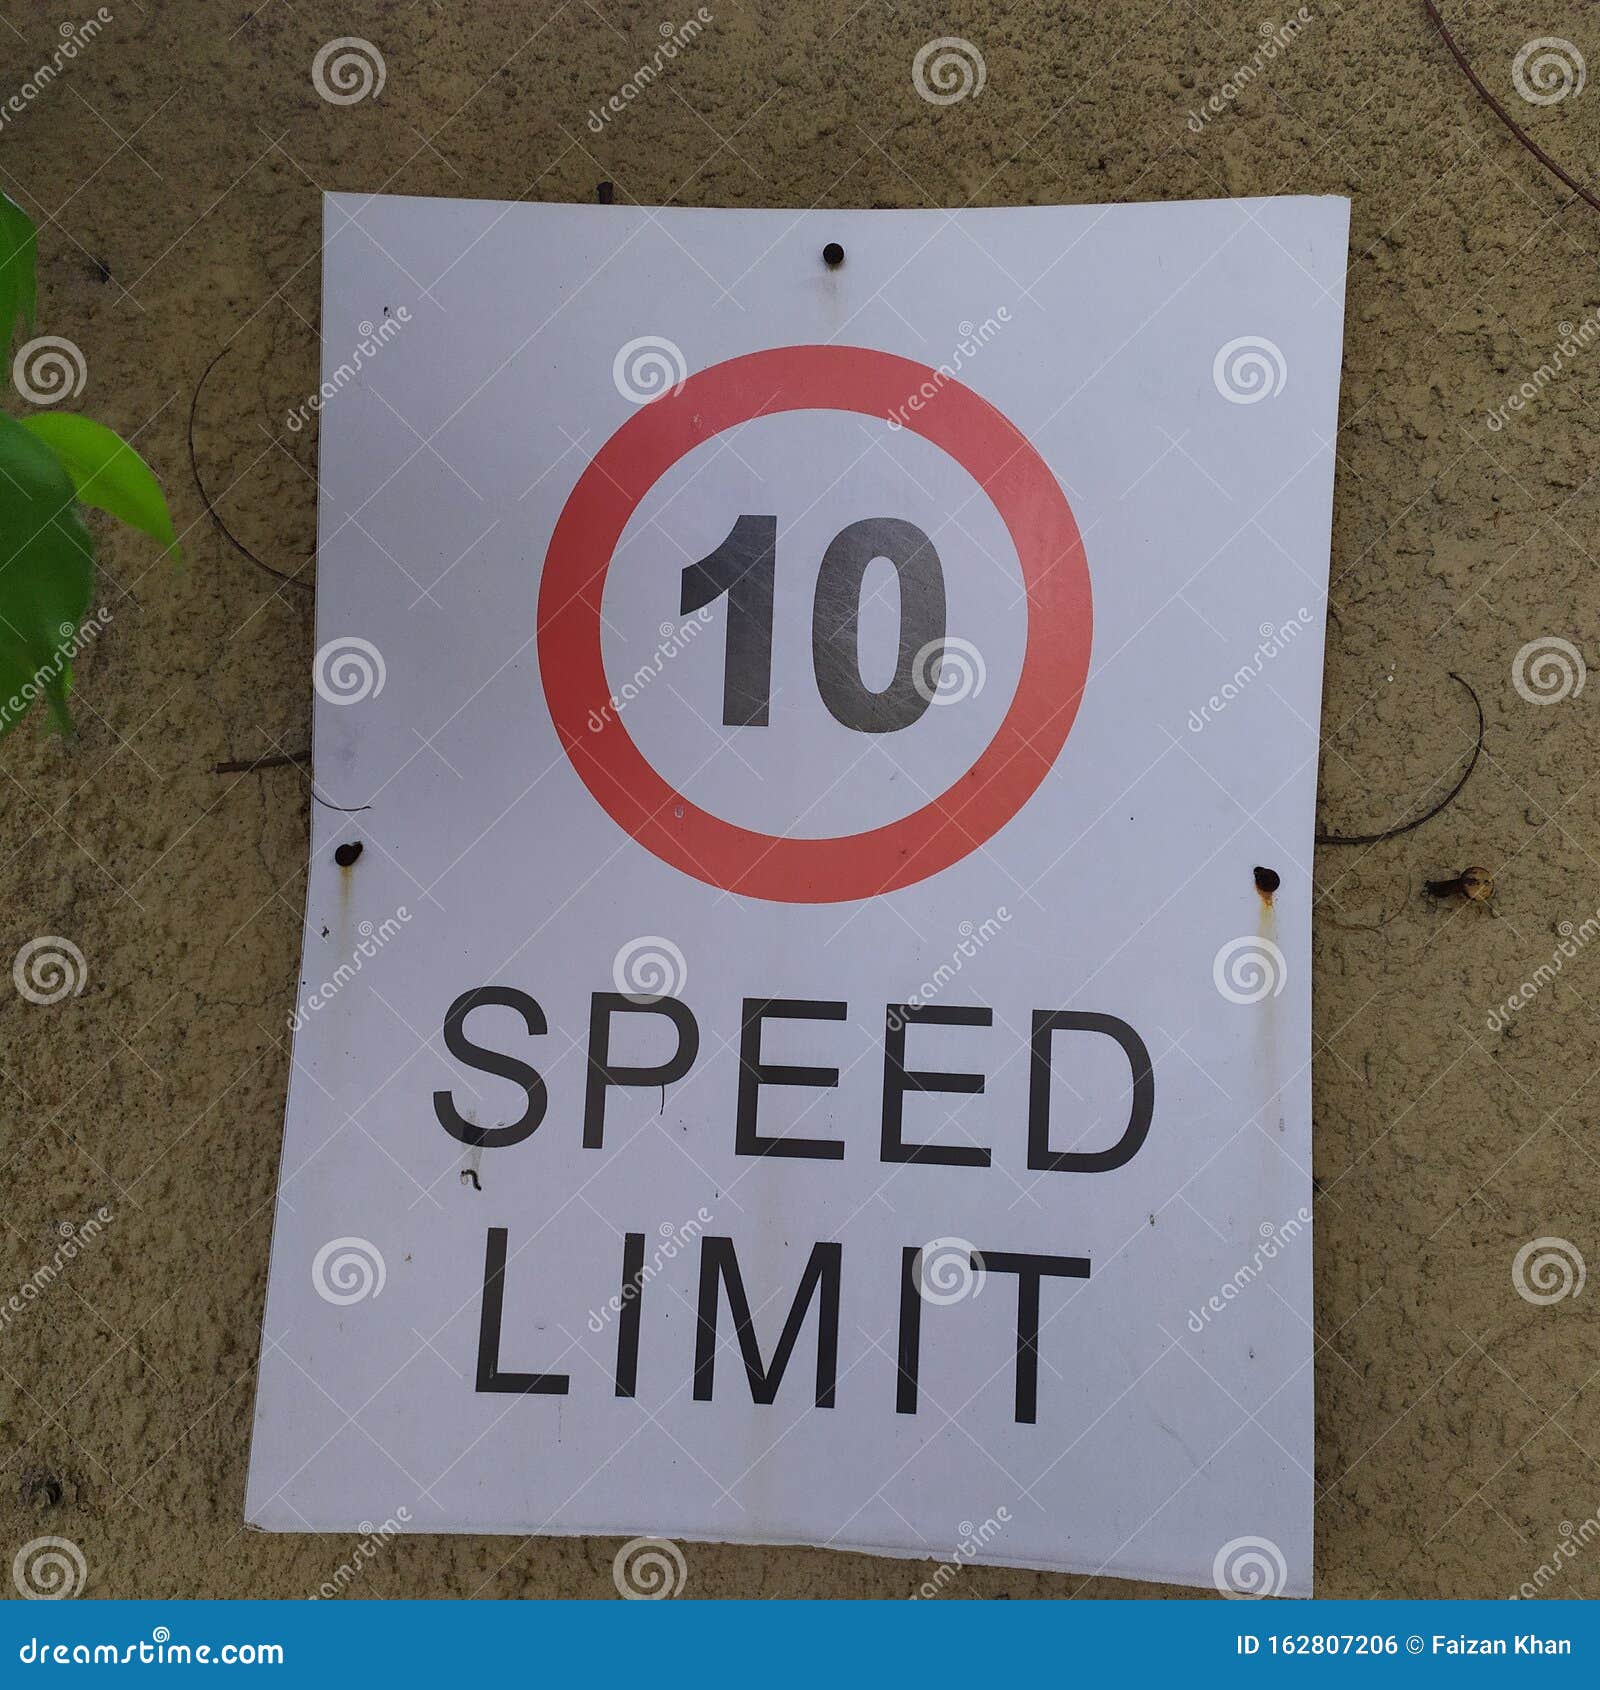 sinage for speed limit of 10 in public area